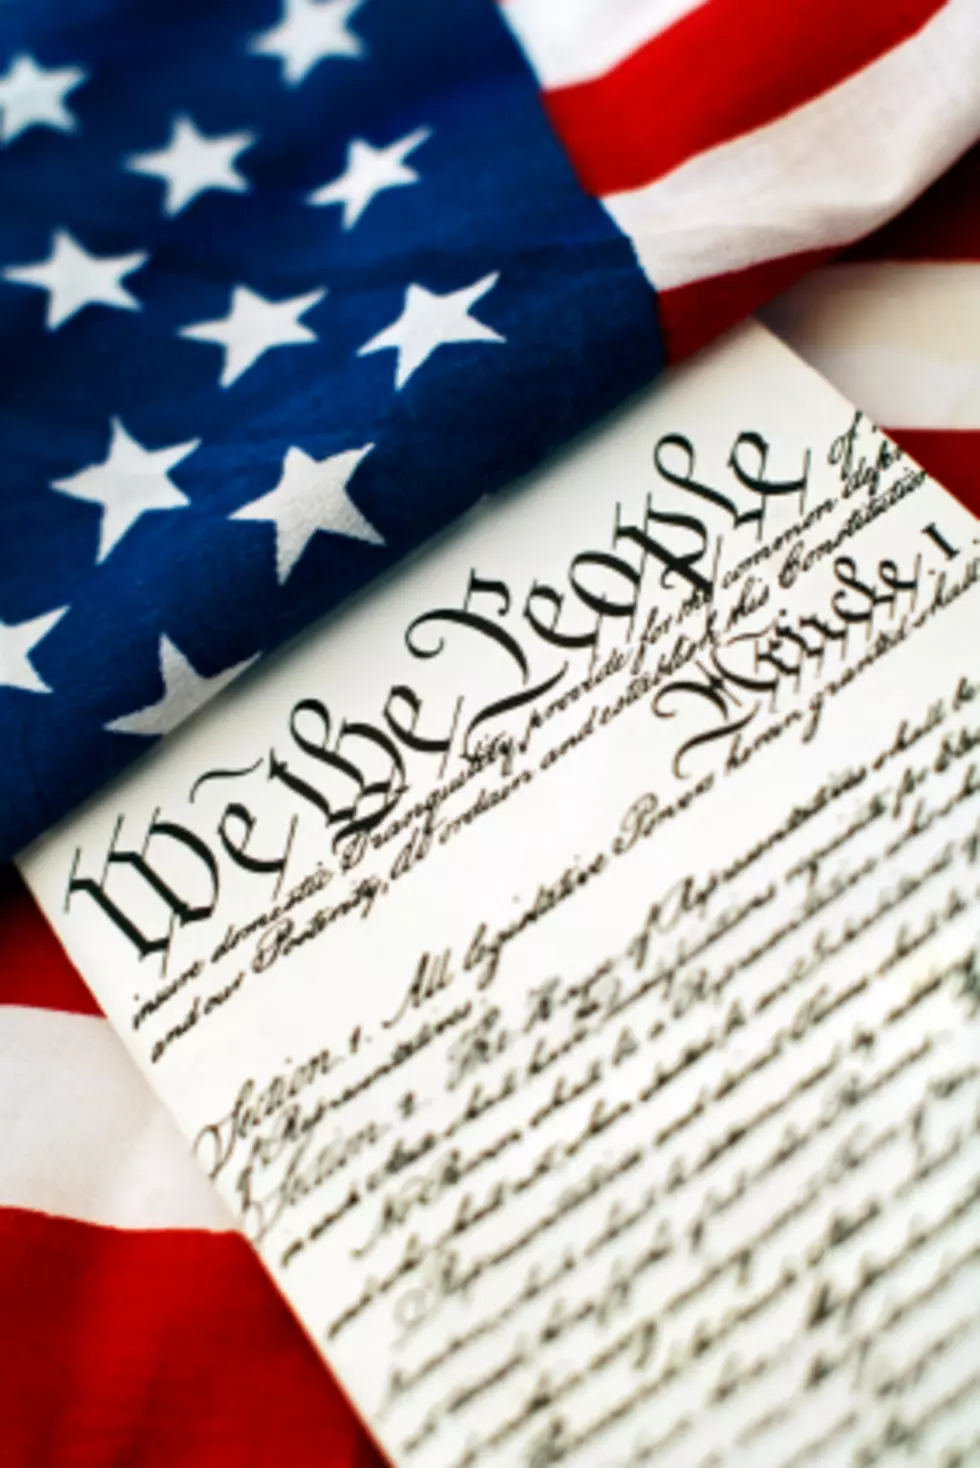 Poll - New Jerseyans need refresher course on U.S. Constitution